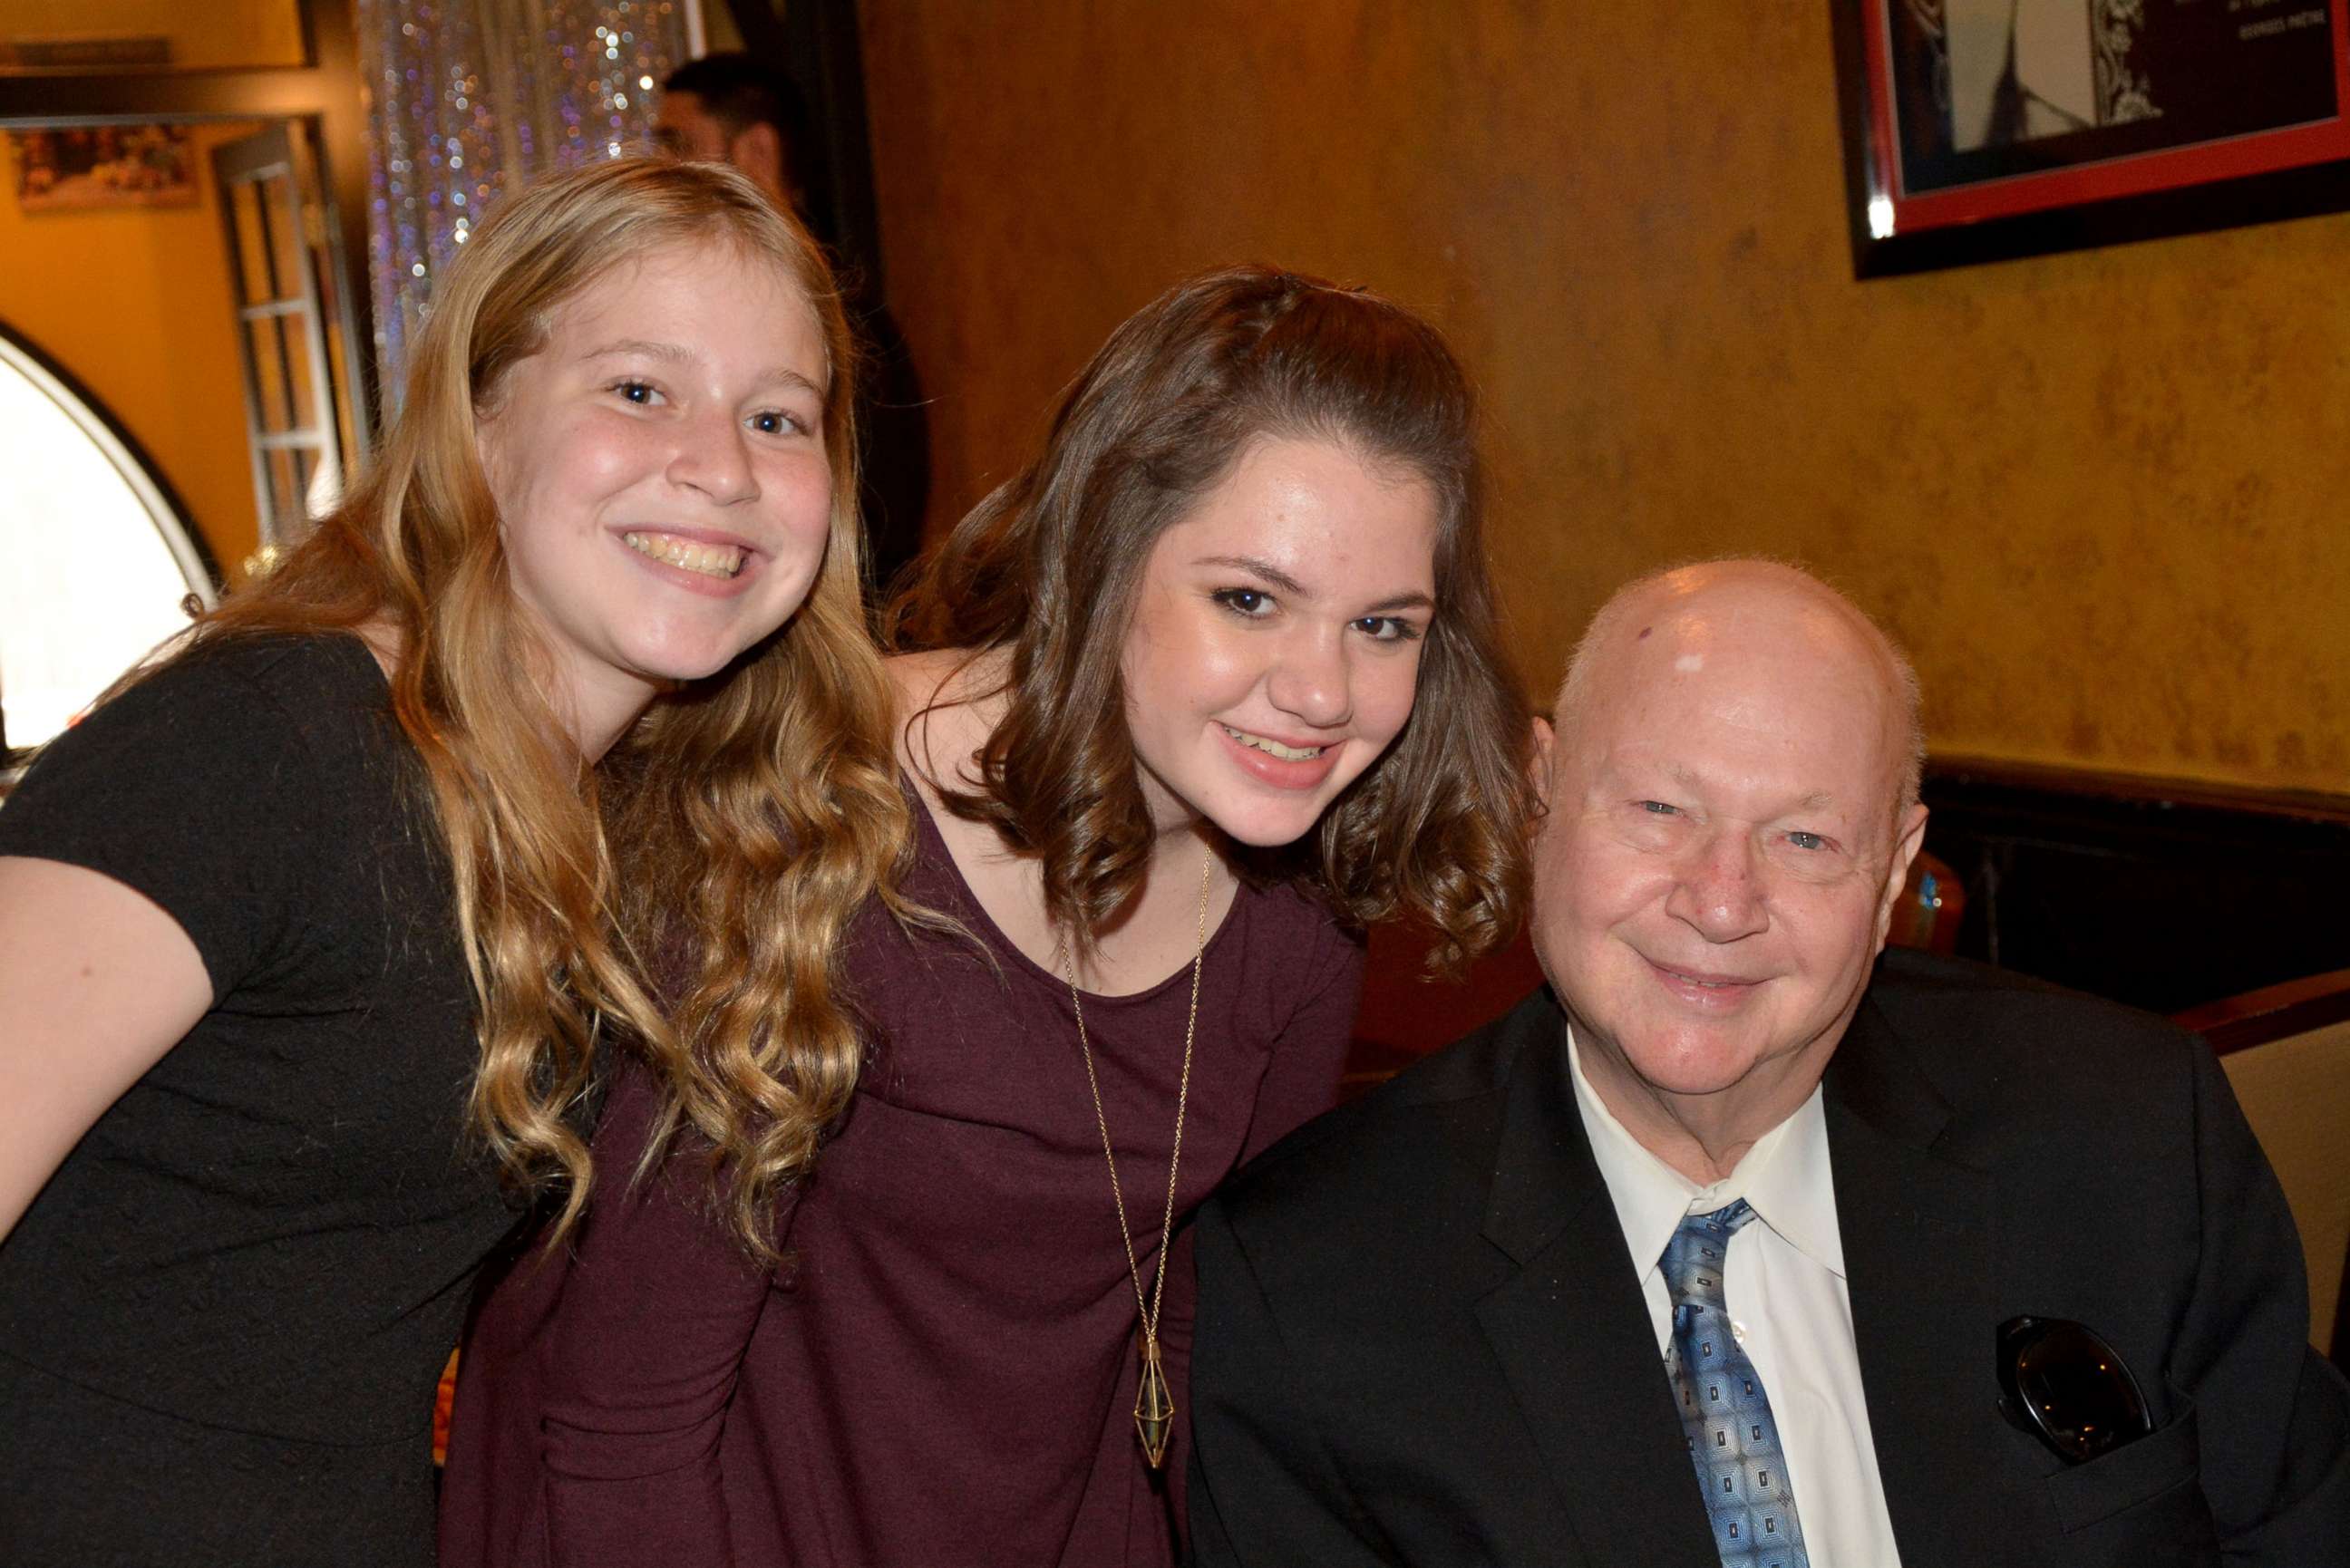 PHOTO: Carol Ackerman's father Stanley J. Teich, who passed away in April at 79, poses with two of his granddaughters.  